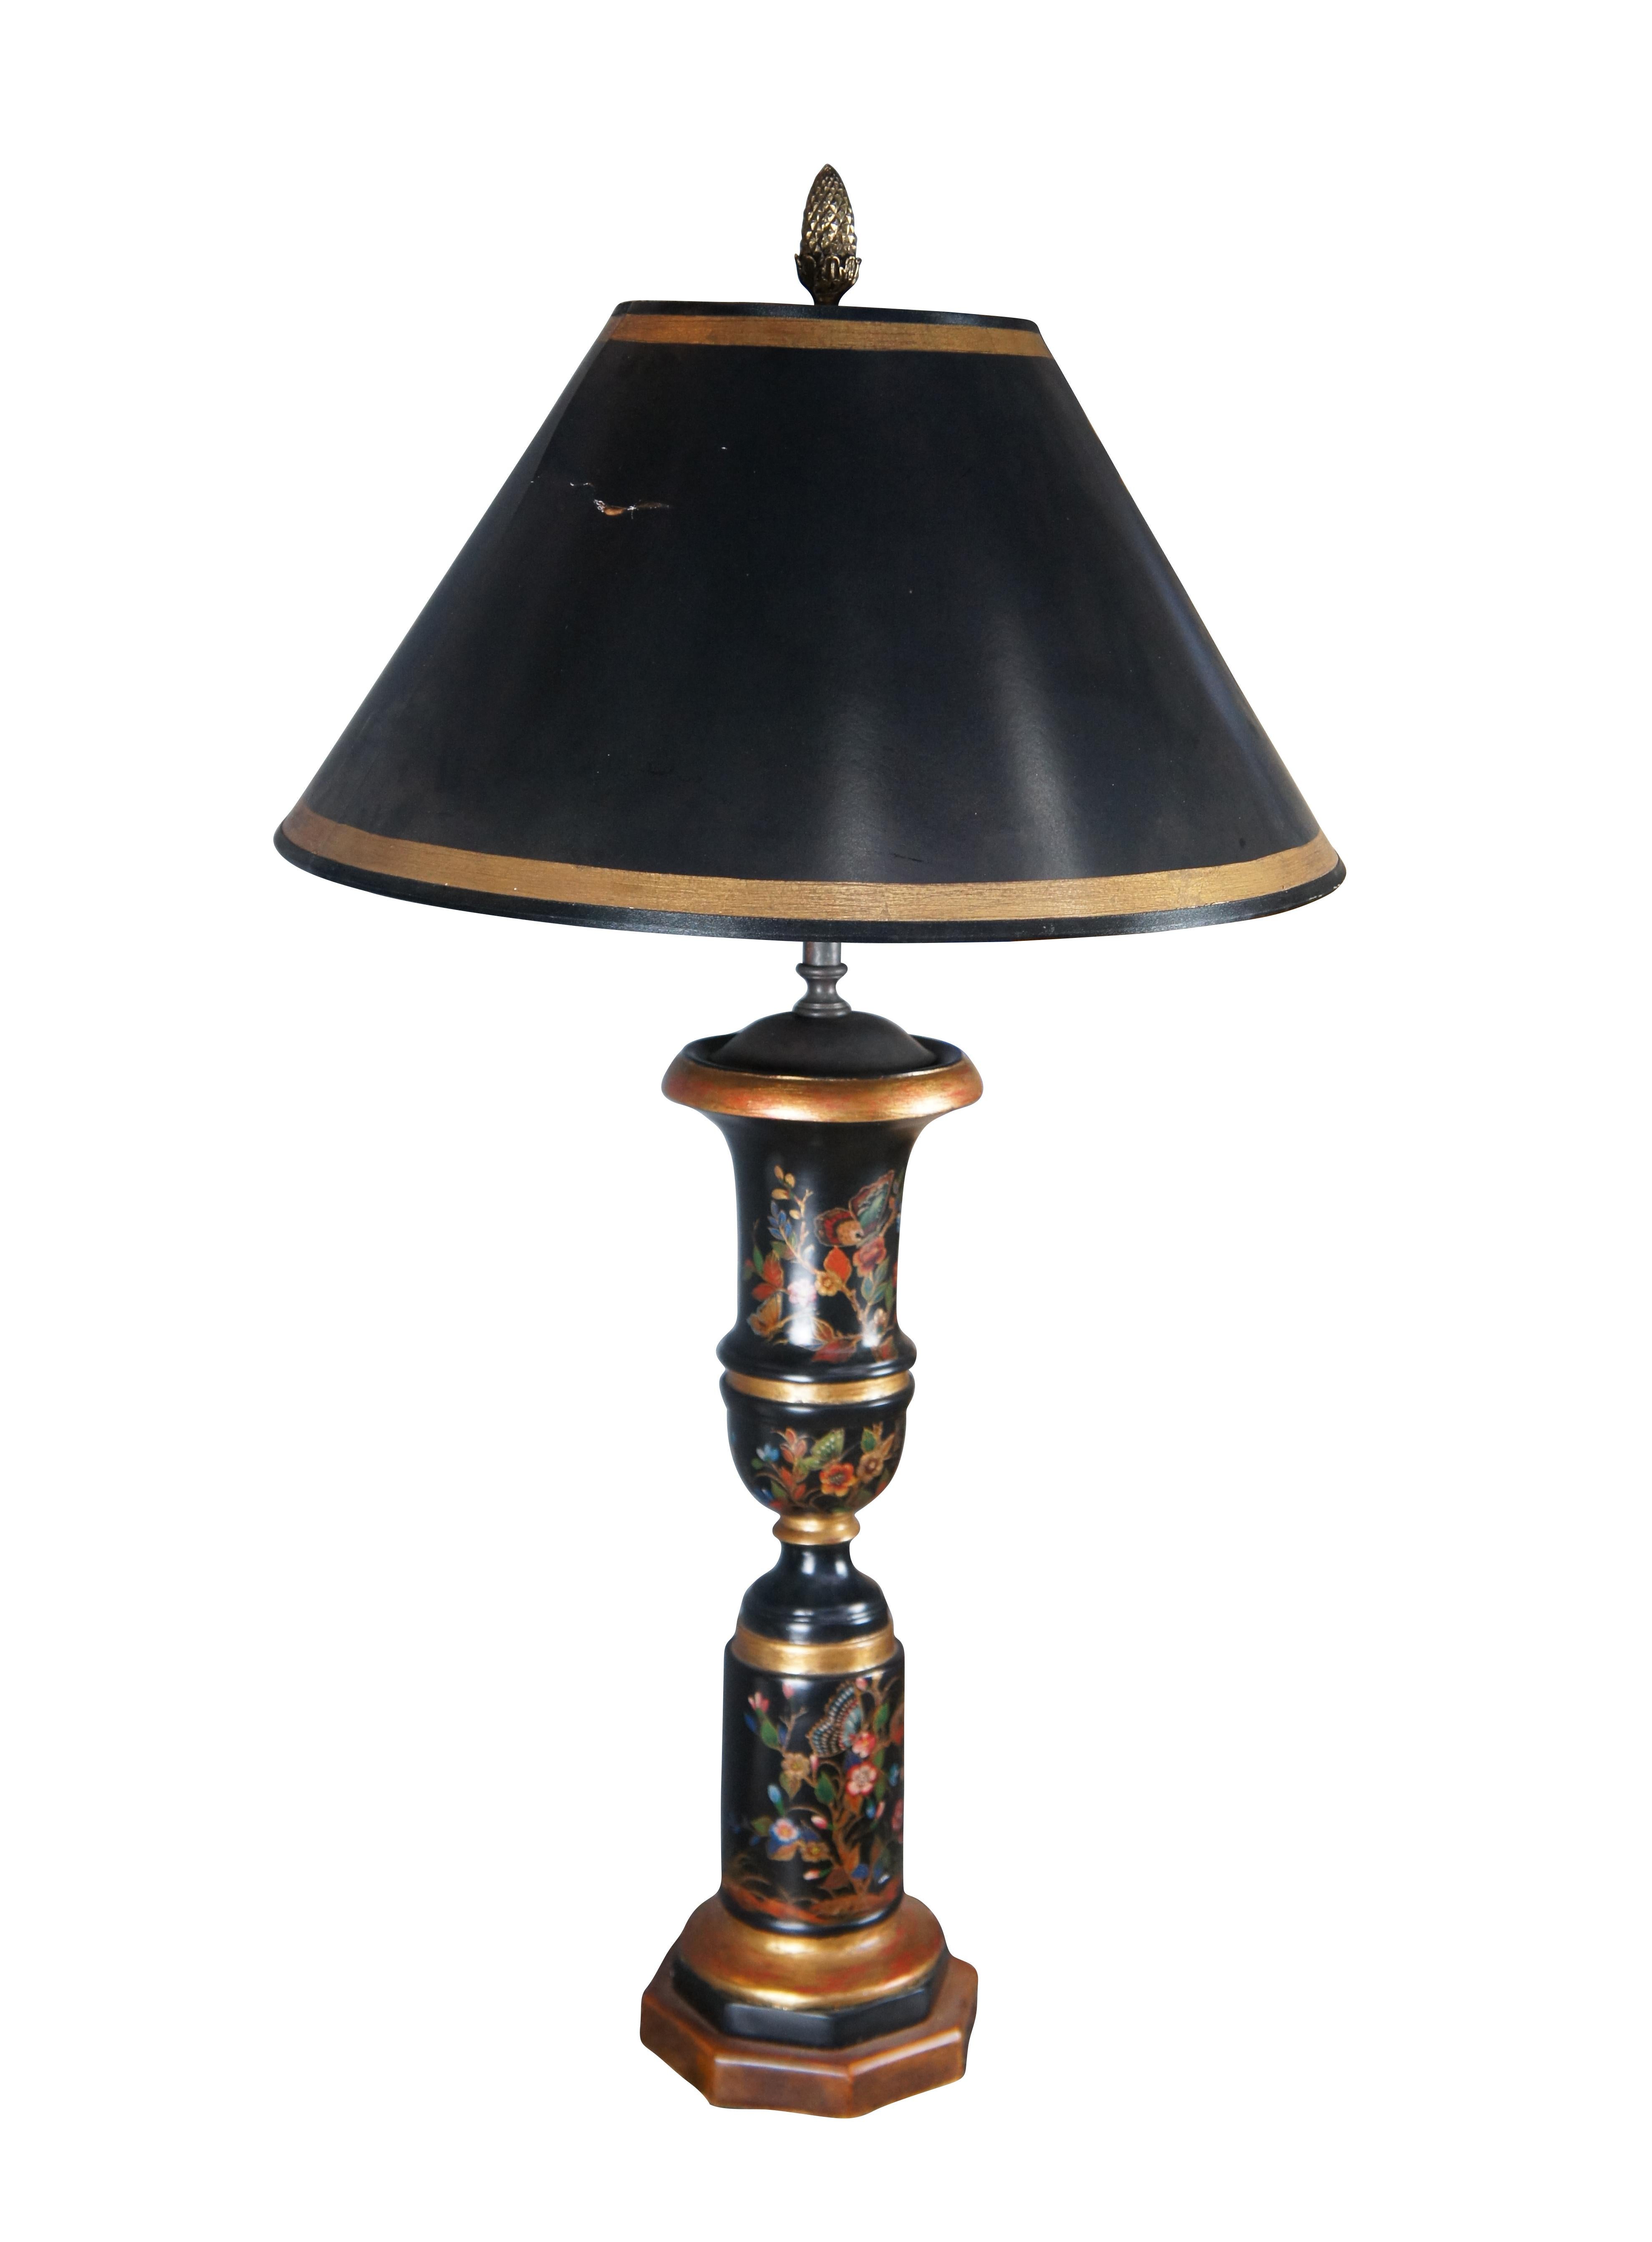 A beautiful Theodore Alexander Tole style table lamp. It features a trumpet or trophy urn form with a black hand painted wooden column decorated in colorful flowers and butterflies. The lamp is accented in gold and has a black tapered shade with